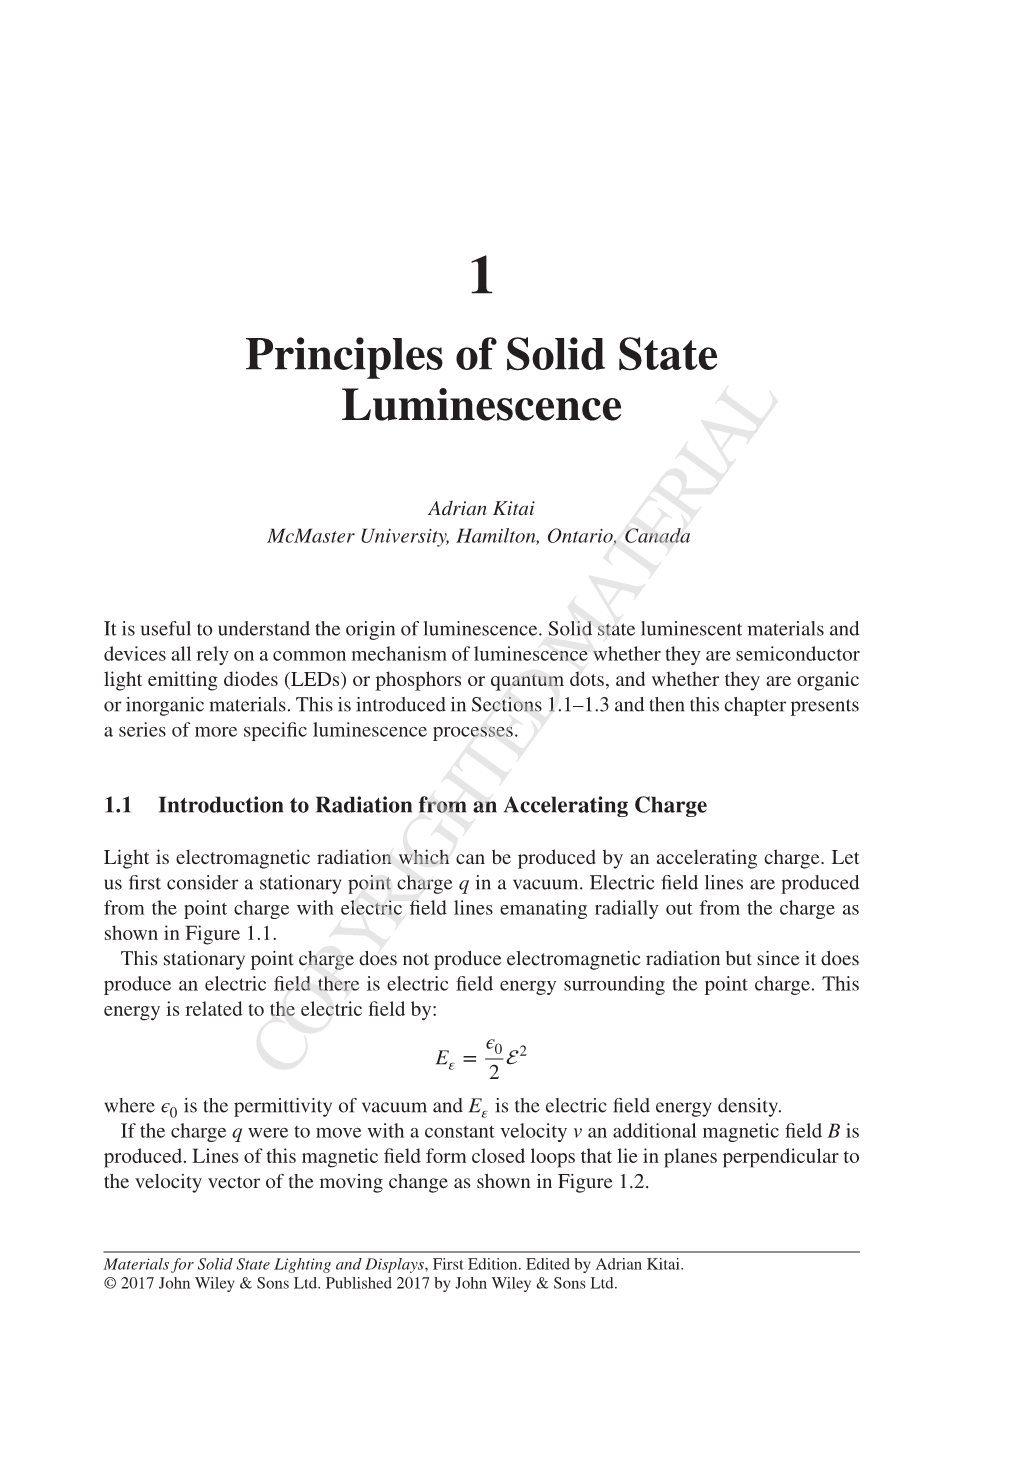 1 Principles of Solid State Luminescence